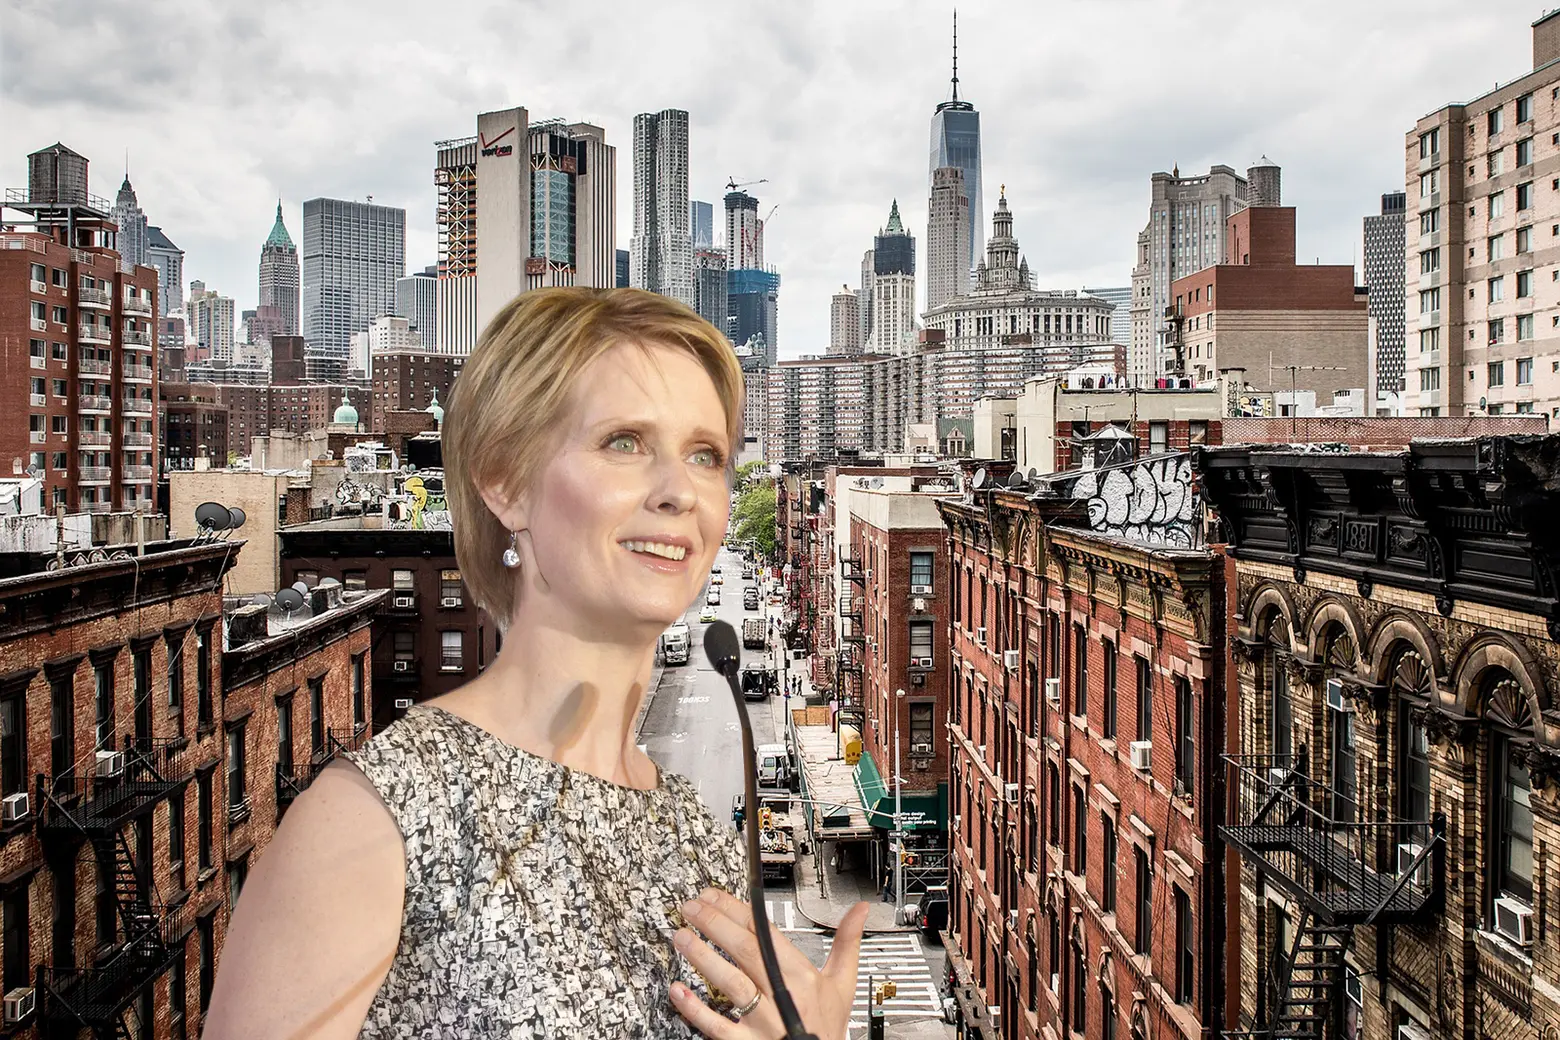 Cynthia Nixon’s Rent Justice for All platform would extend rent stabilization and boost tenant protection